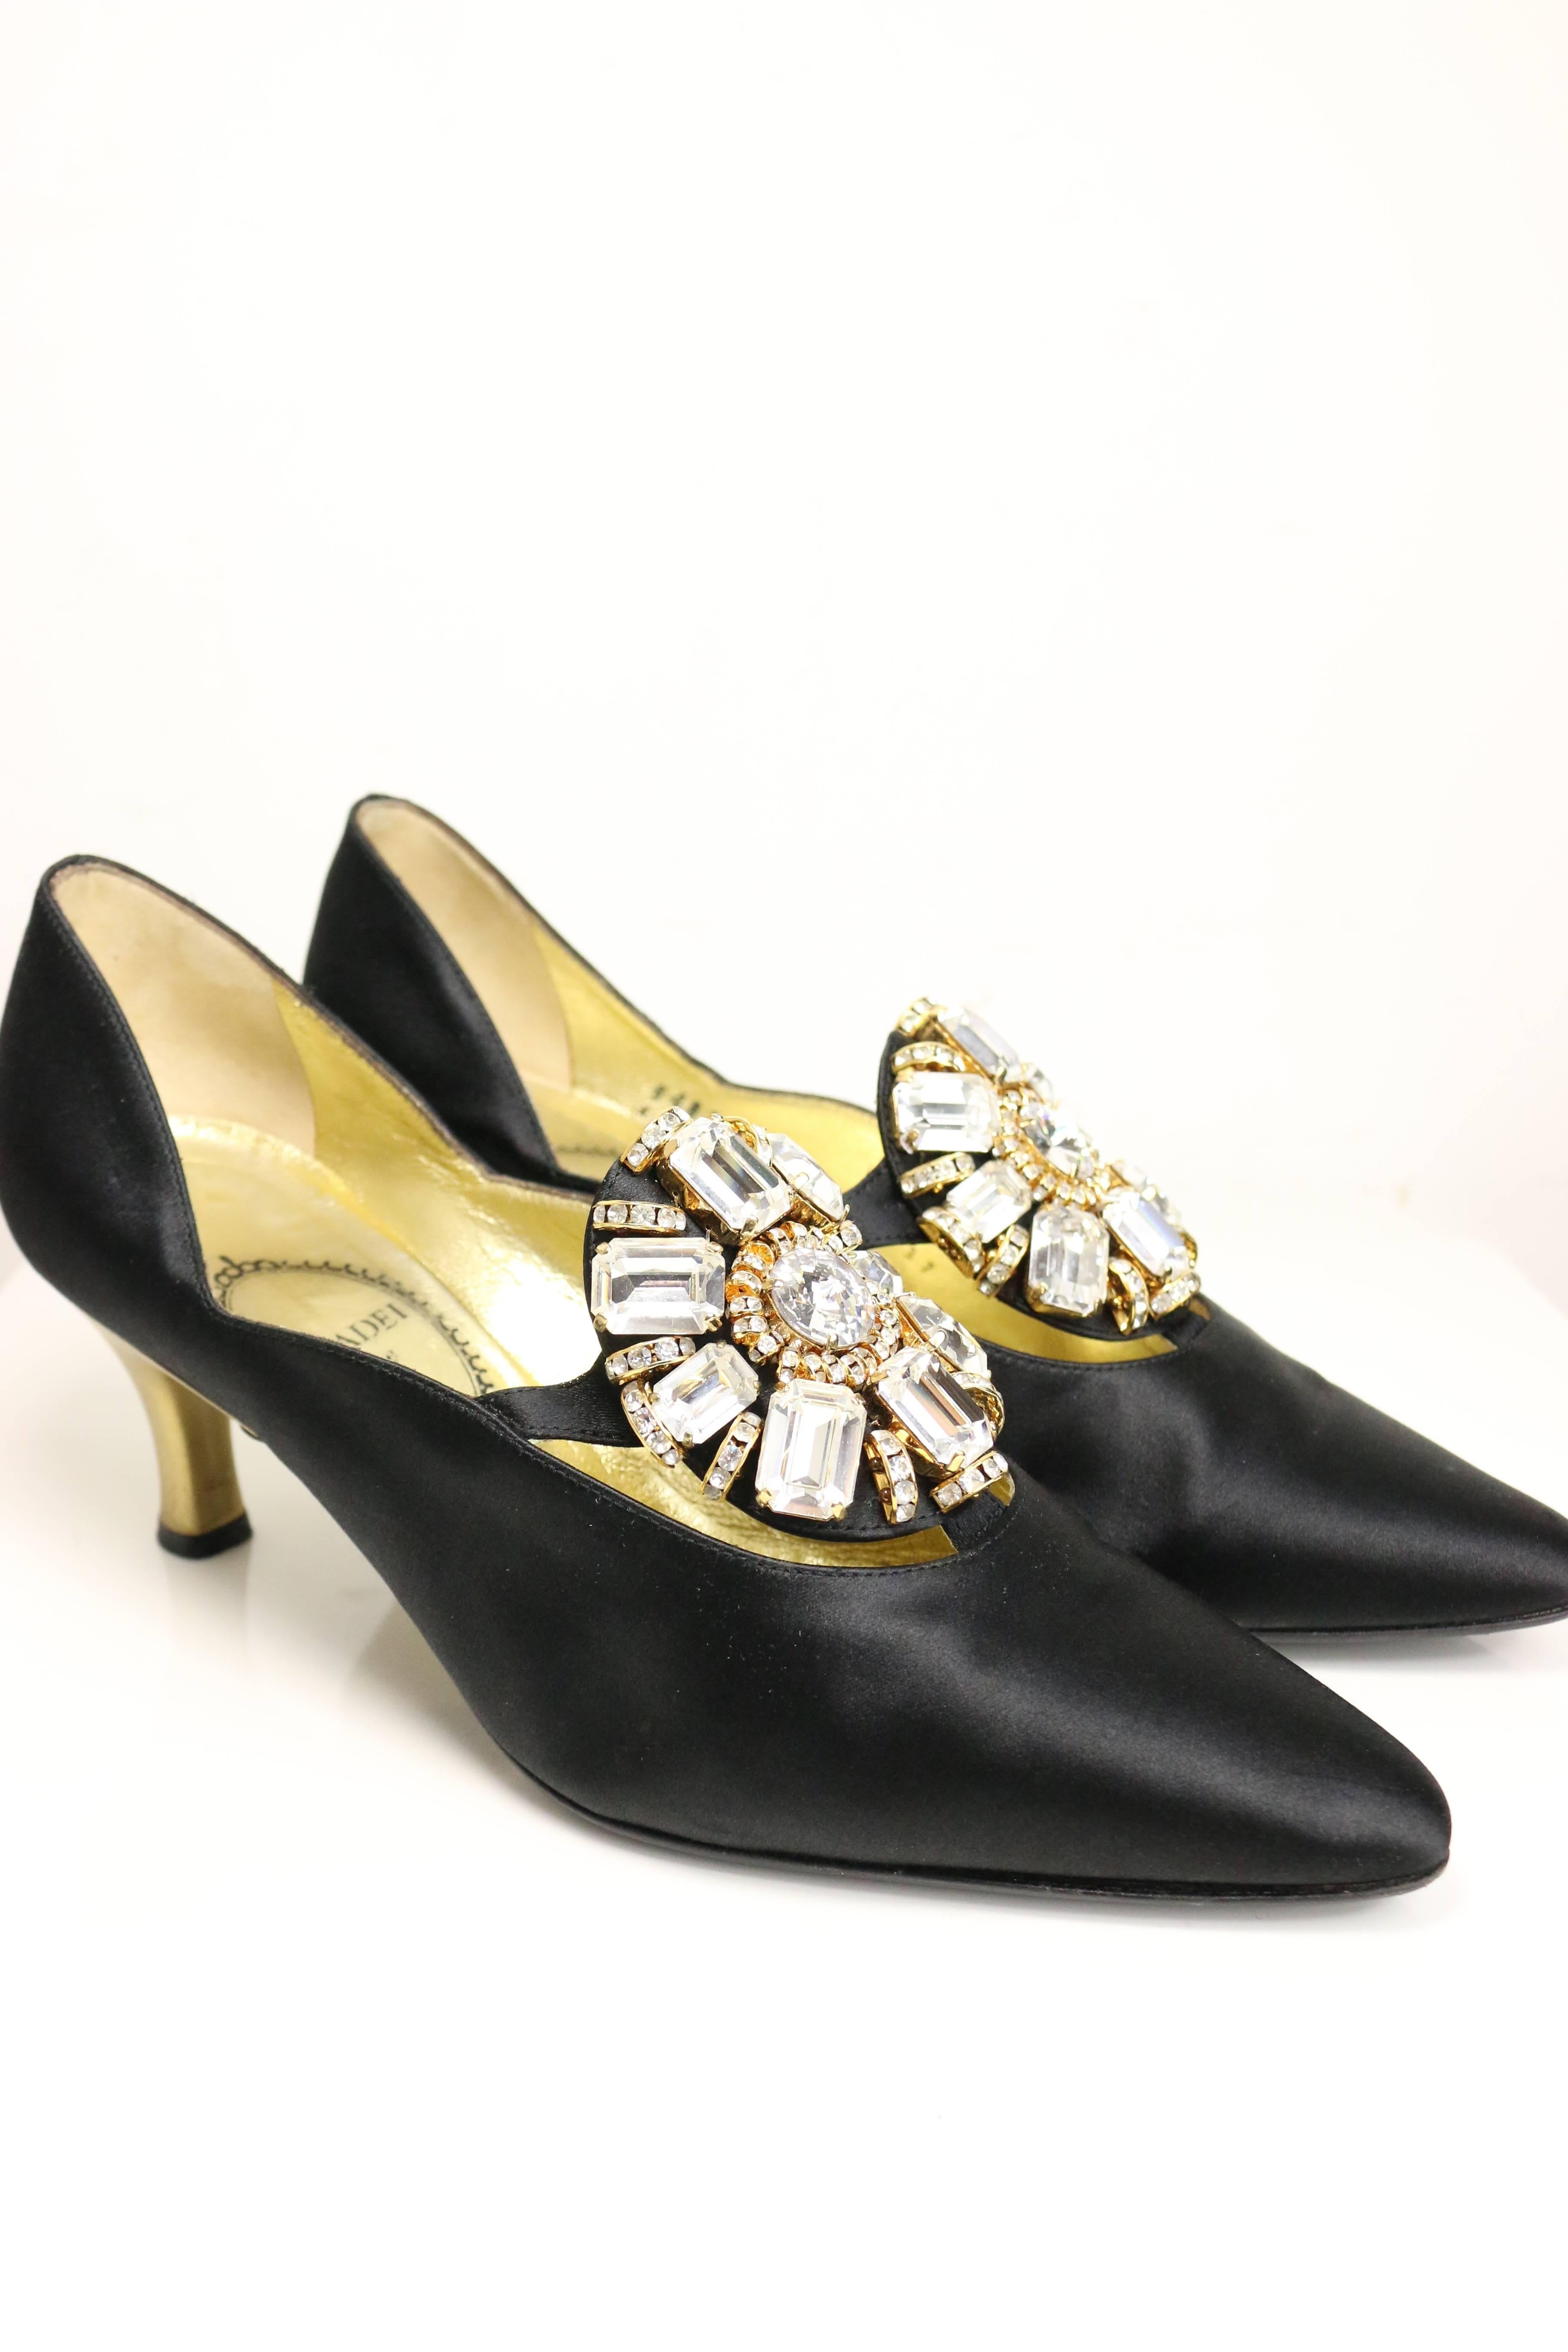 Casadei Black Satin Gold Toned Crystal Rhinestones Evening Shoes  In Excellent Condition In Sheung Wan, HK